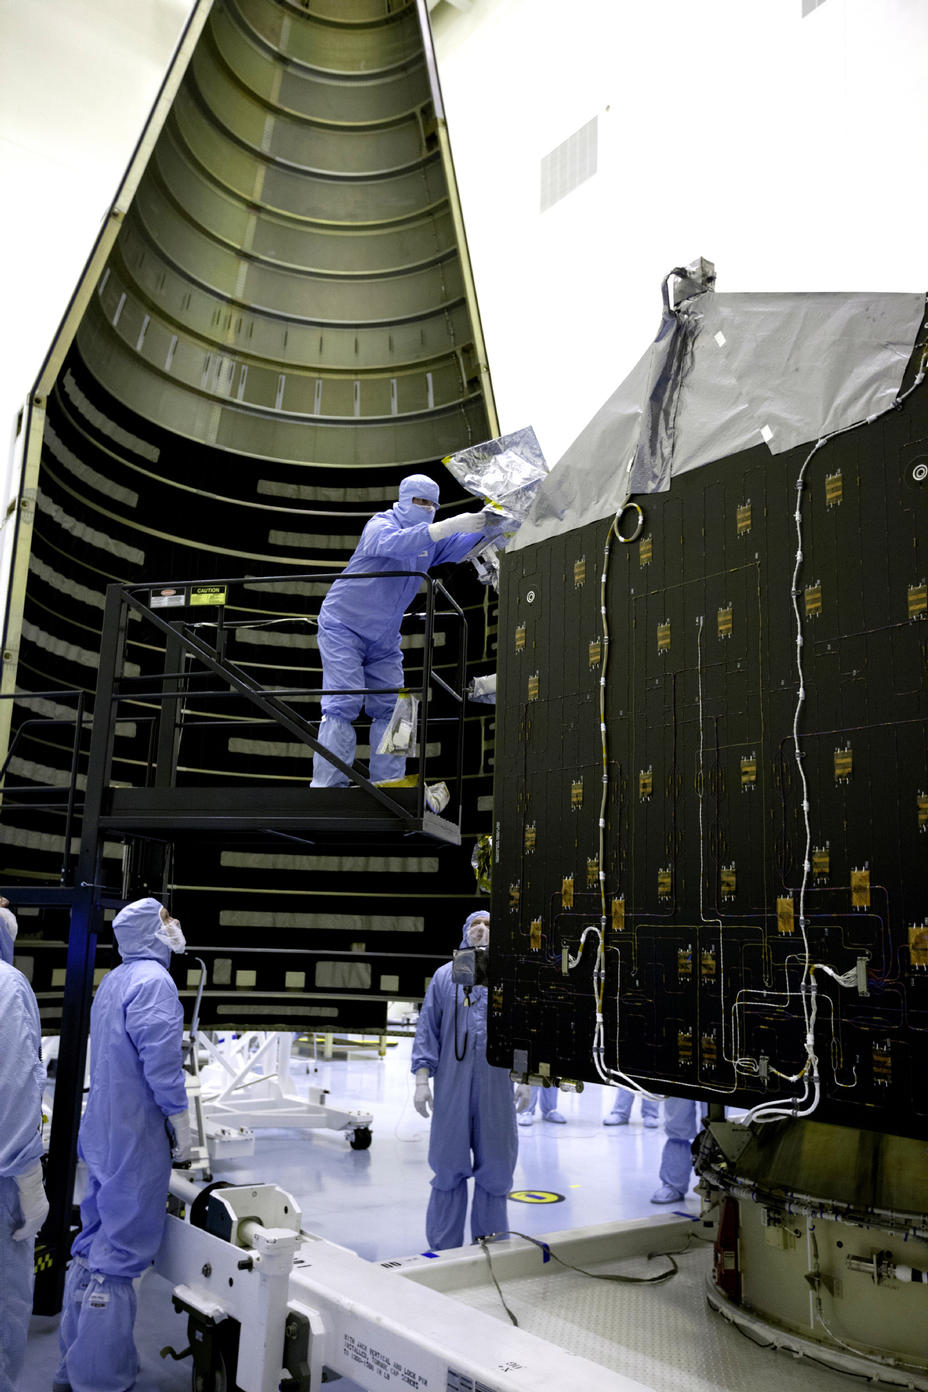 Inside the Payload Hazardous Servicing Facility at NASA's Kennedy Space Center in Florida, engineers and technicians prepare the Mars Atmosphere and Volatile Evolution, or MAVEN, spacecraft for encapsulation inside its payload fairing.